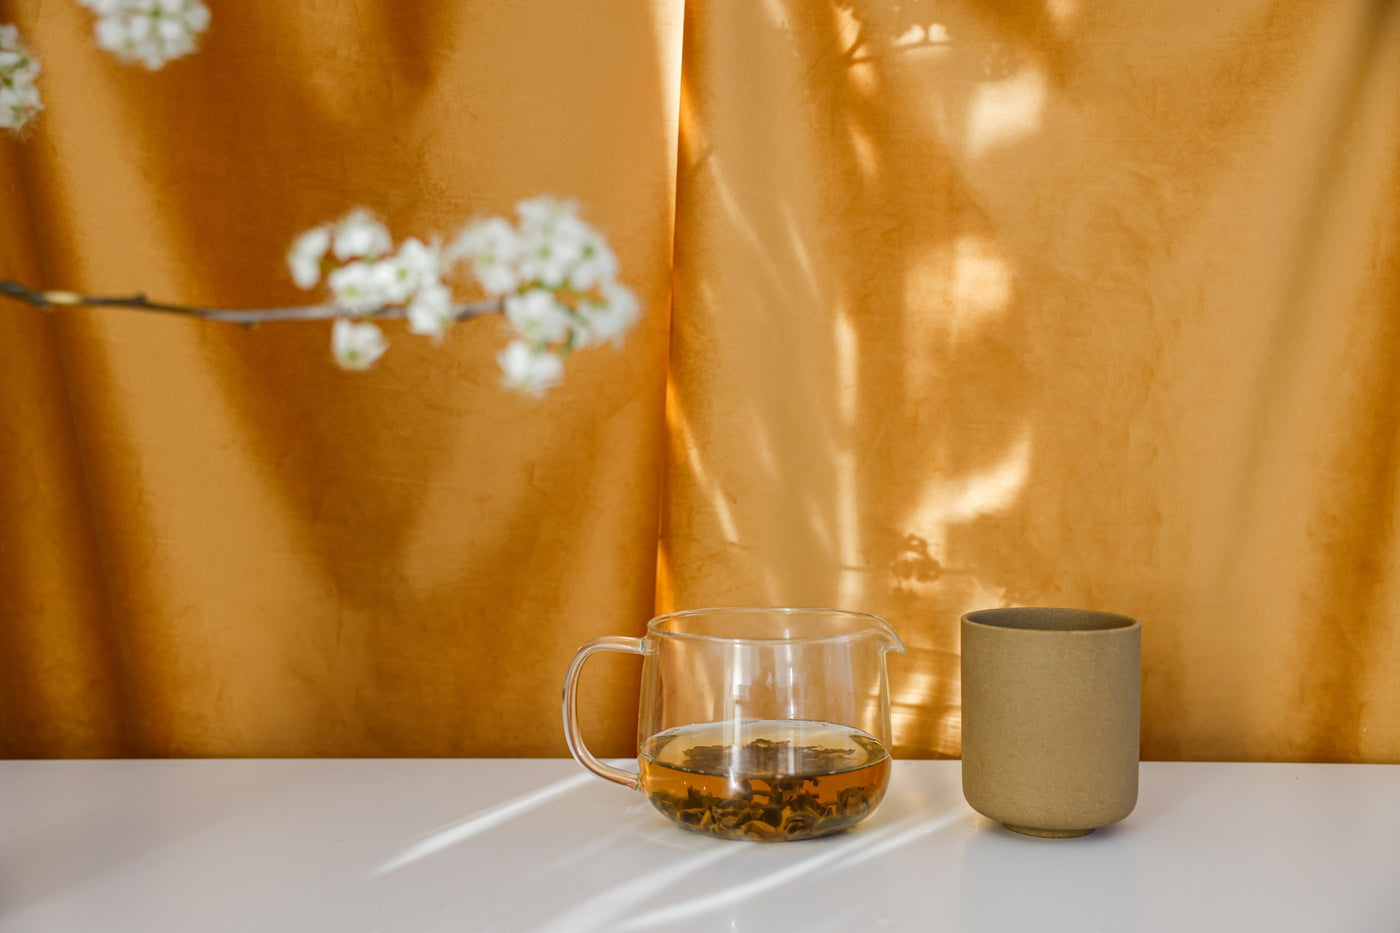 TCM Herbal Teas: Nature's Remedy for Well-Being